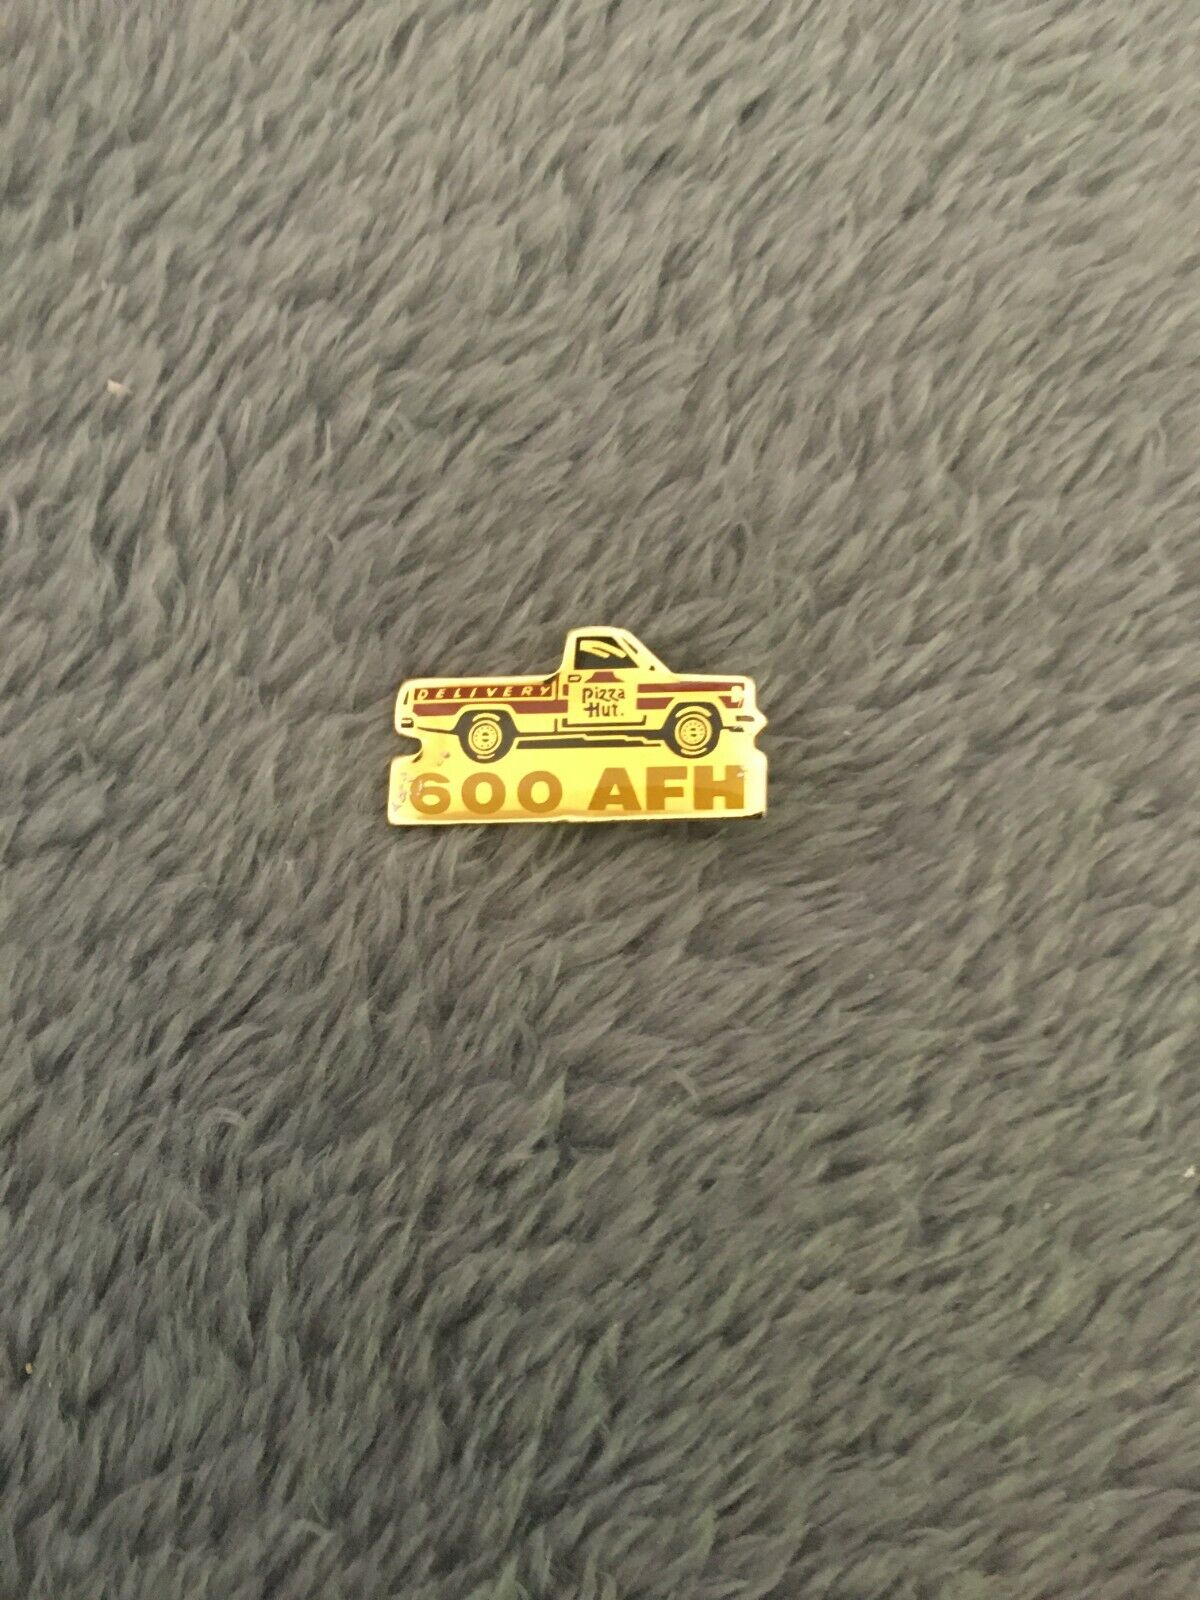 Pizza Hut employee achievement pin (600 AFH) for accident-free hours